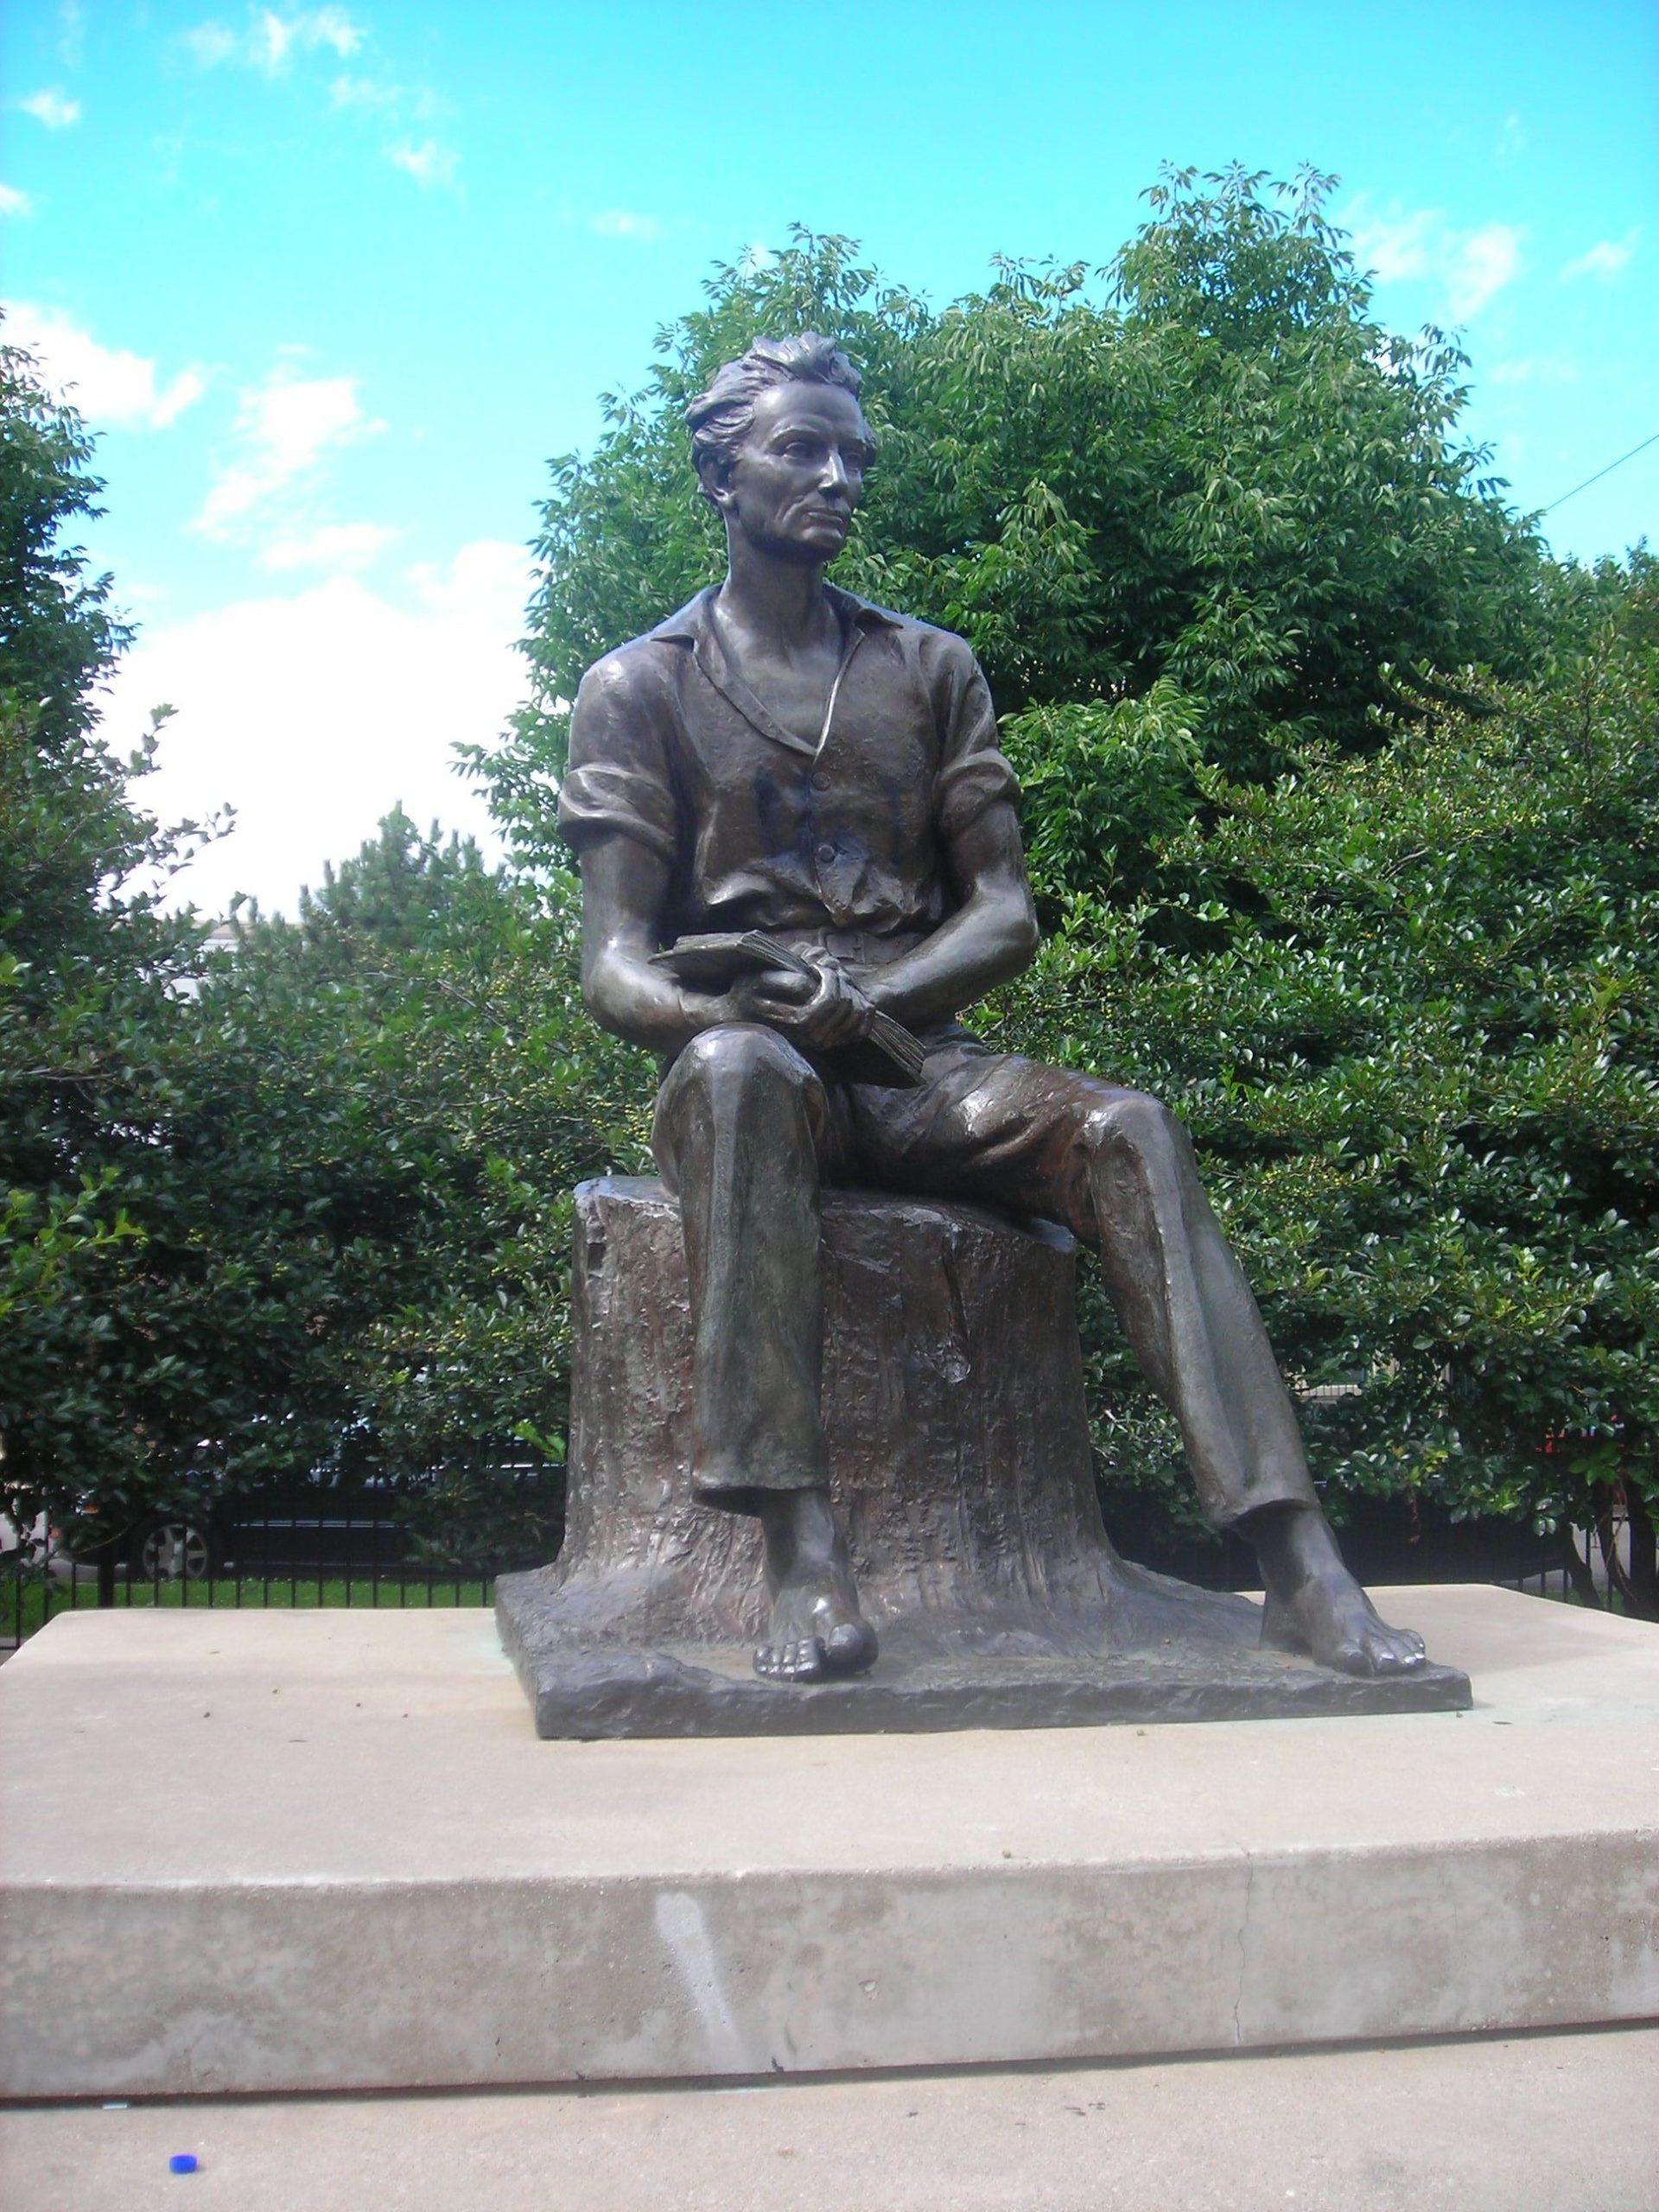 Charles Keck, <em>The Young Lincoln</em>, c. 1945, bronze sculpture on a concrete base, 12 x 8 x 8 feet (on loan to the Chicago Park District from the Chicago Public Library)